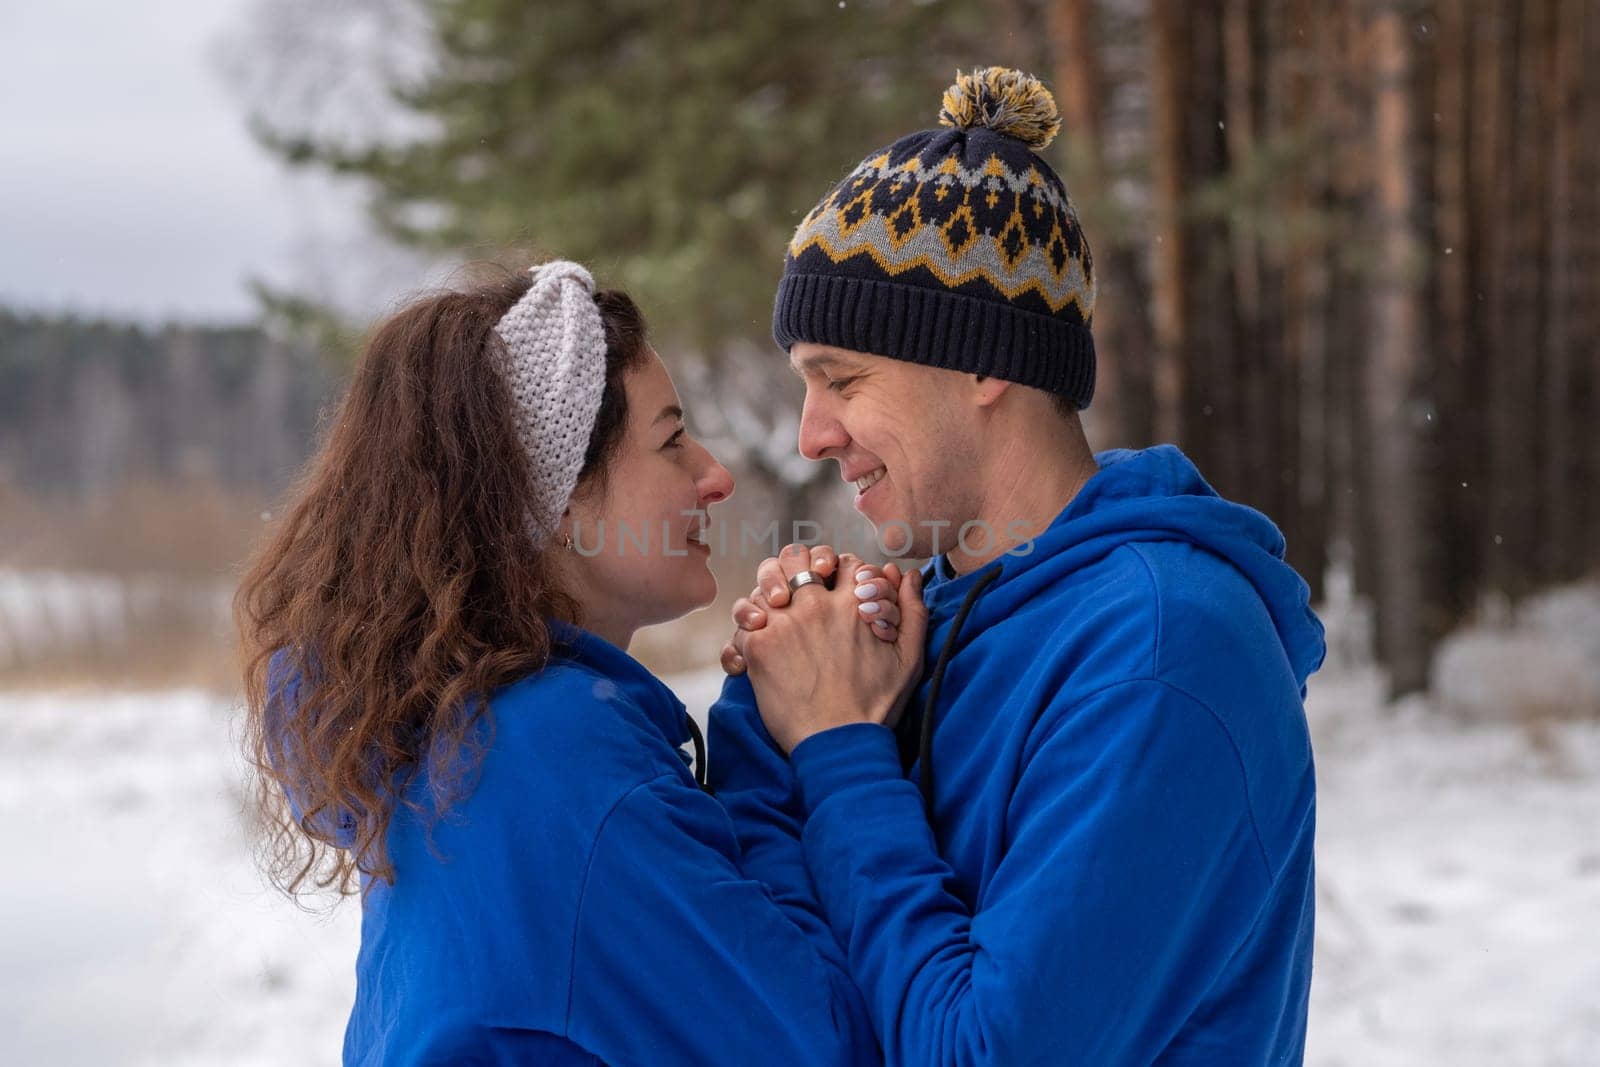 Outdoor happy couple in love posing in cold winter weather. A man and a woman in blue hoodies. Emotional young couple having fun while walking by winter forest, loving man hugging his laughing woman